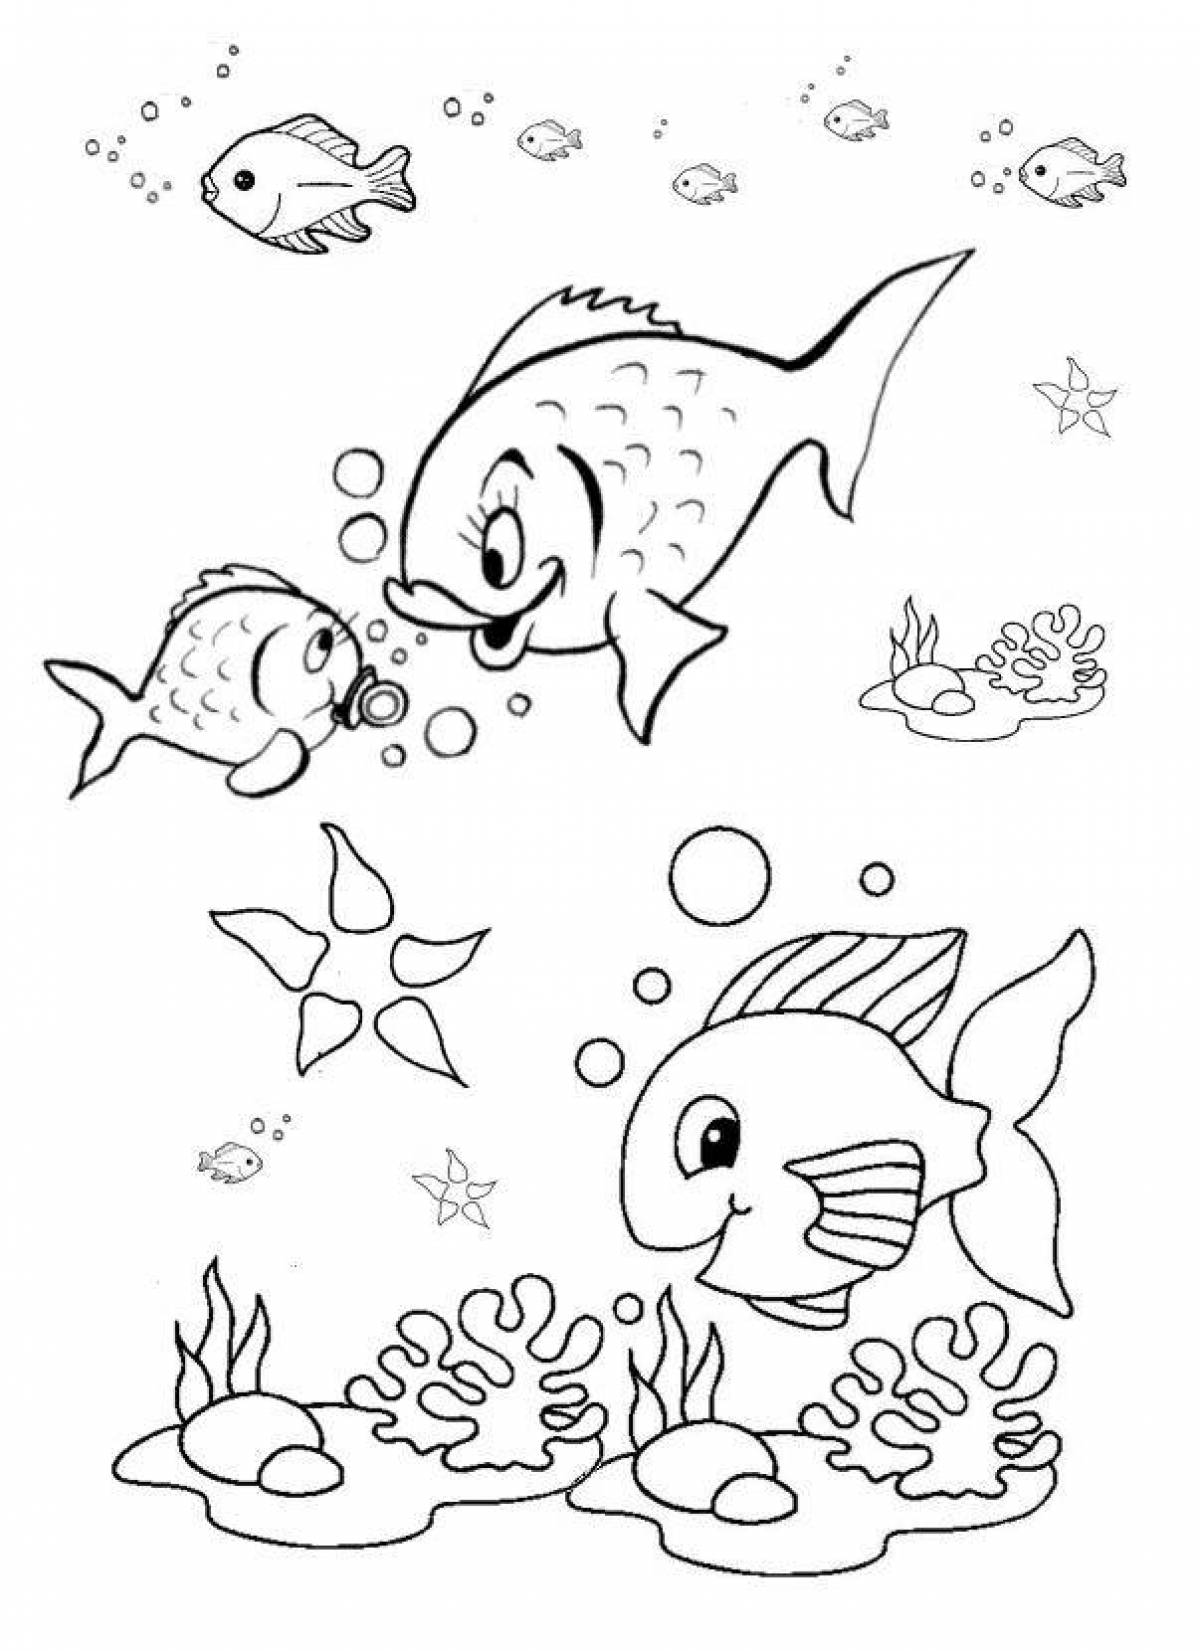 Humorous fish coloring book for children 6-7 years old